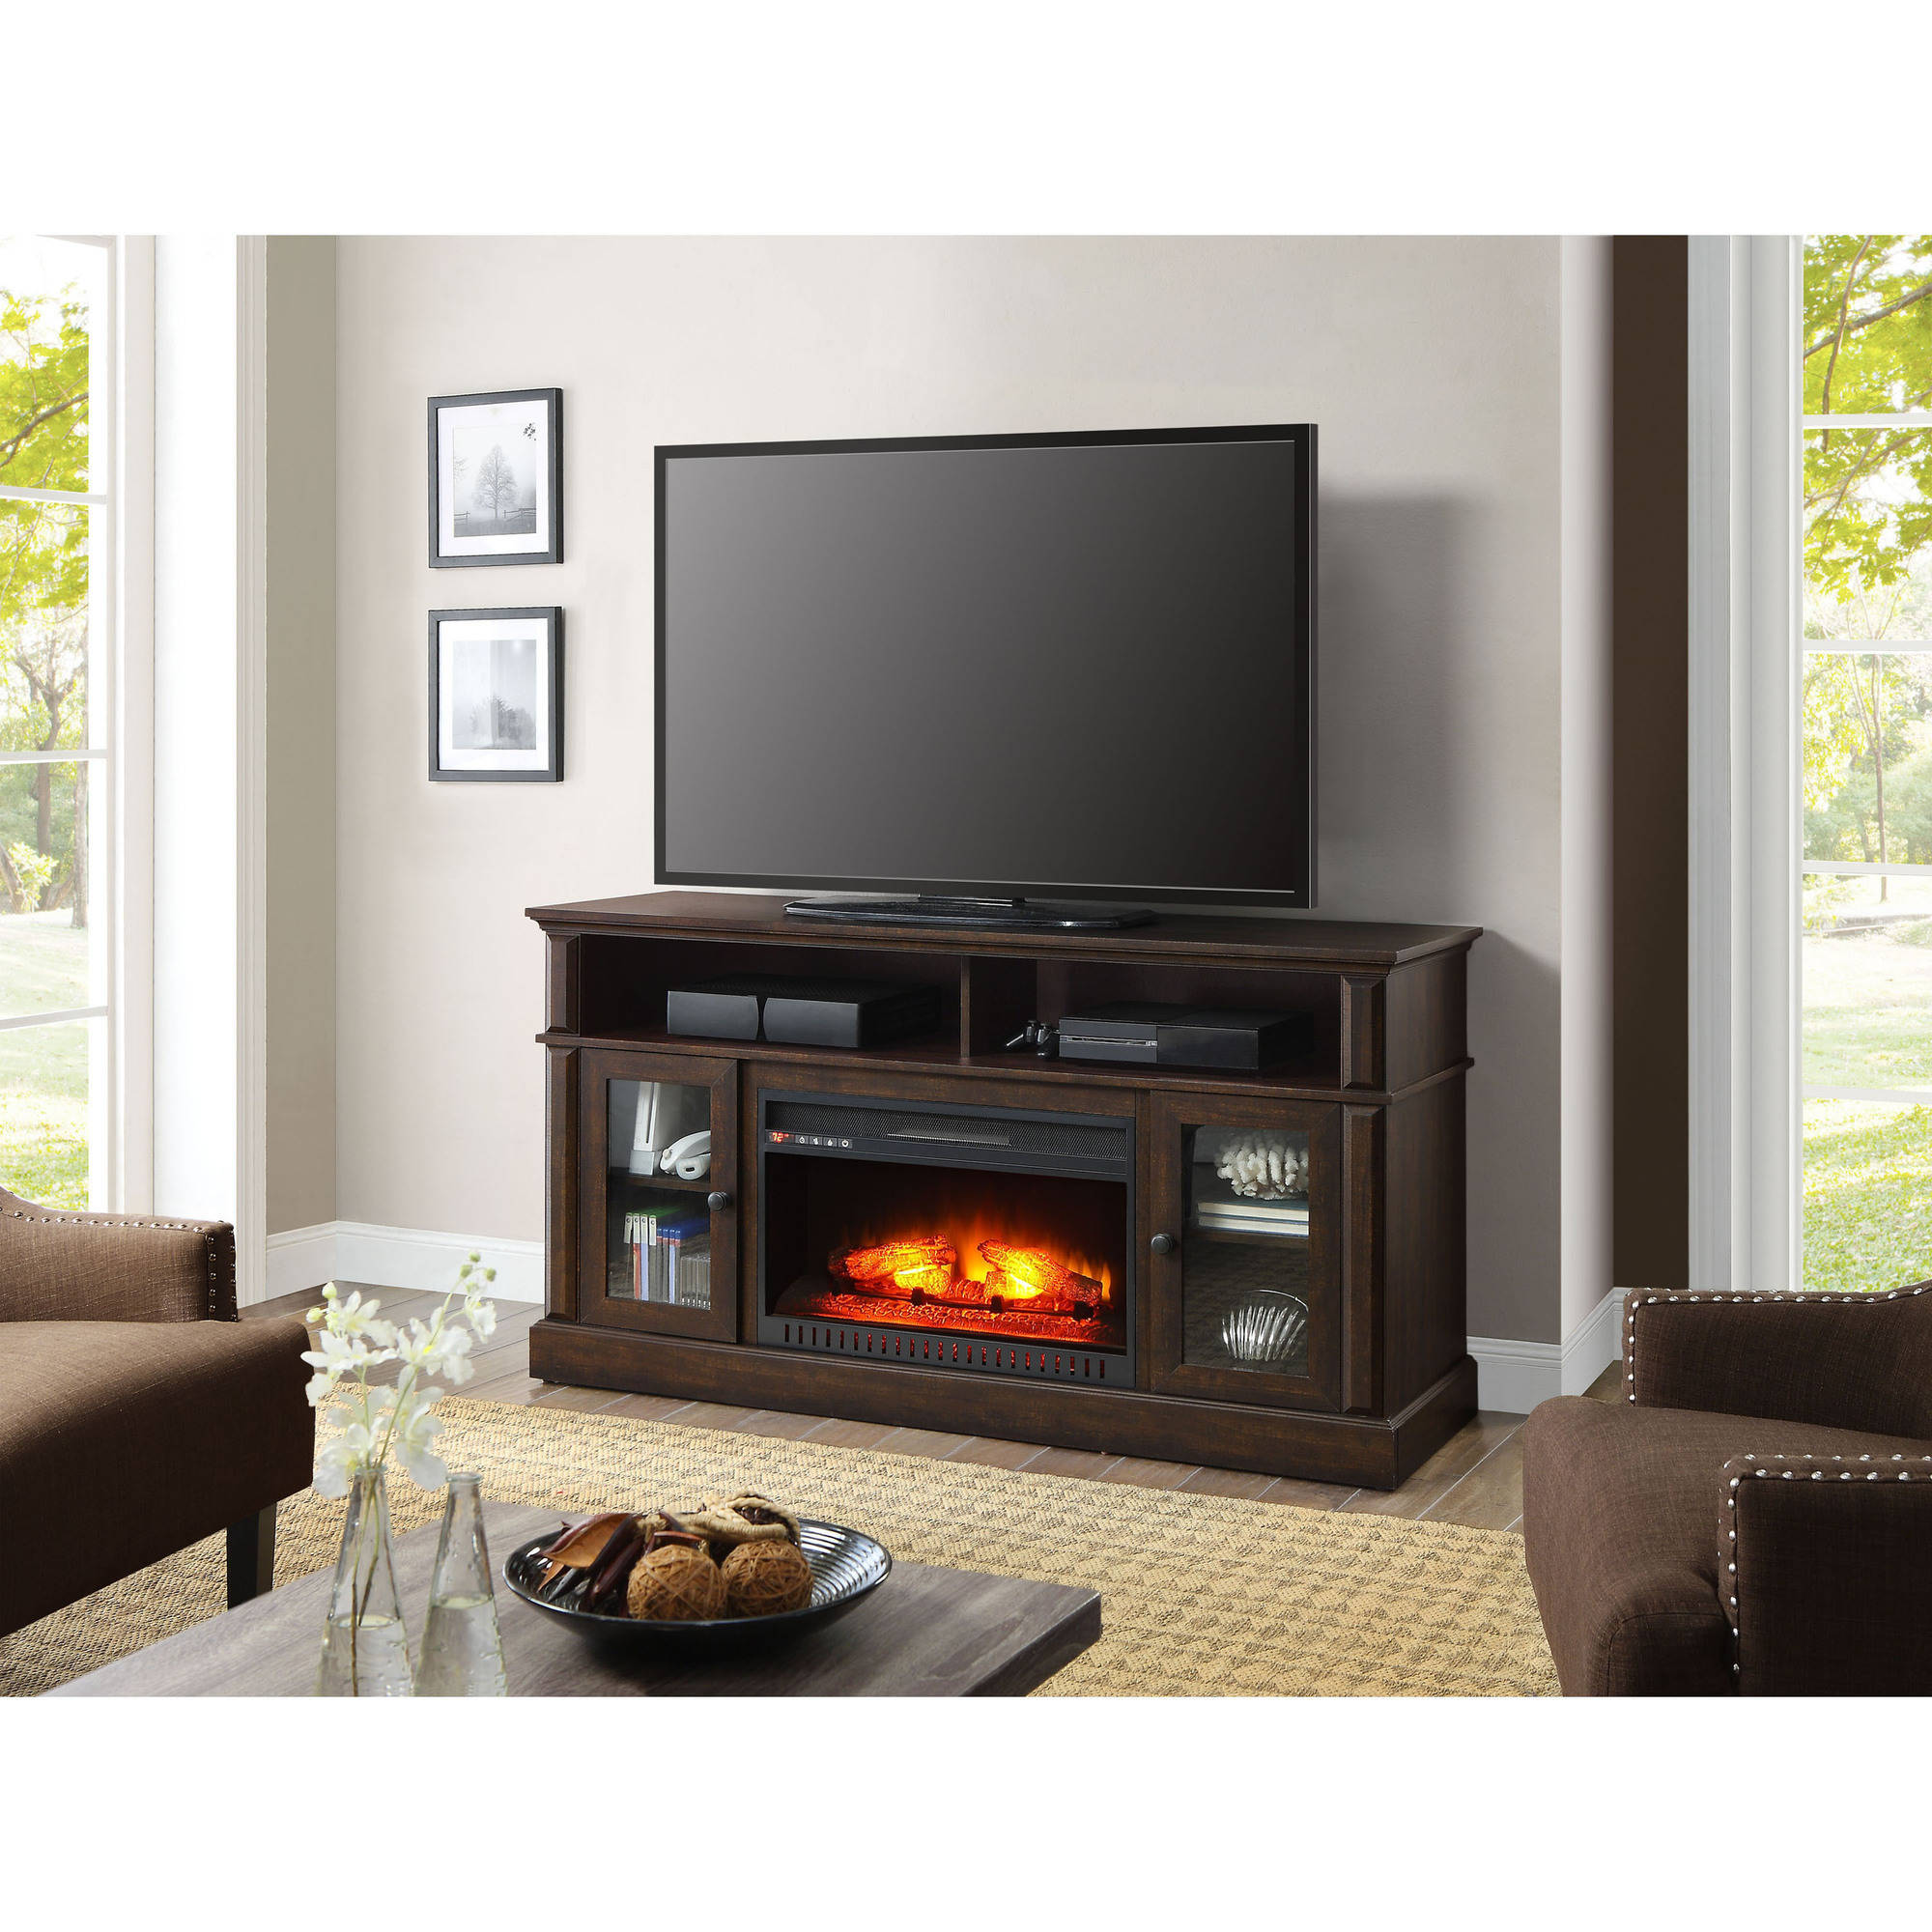 Fireplace Tv Stand with Bluetooth Speakers New Whalen Barston Media Fireplace for Tv S Up to 70 Multiple